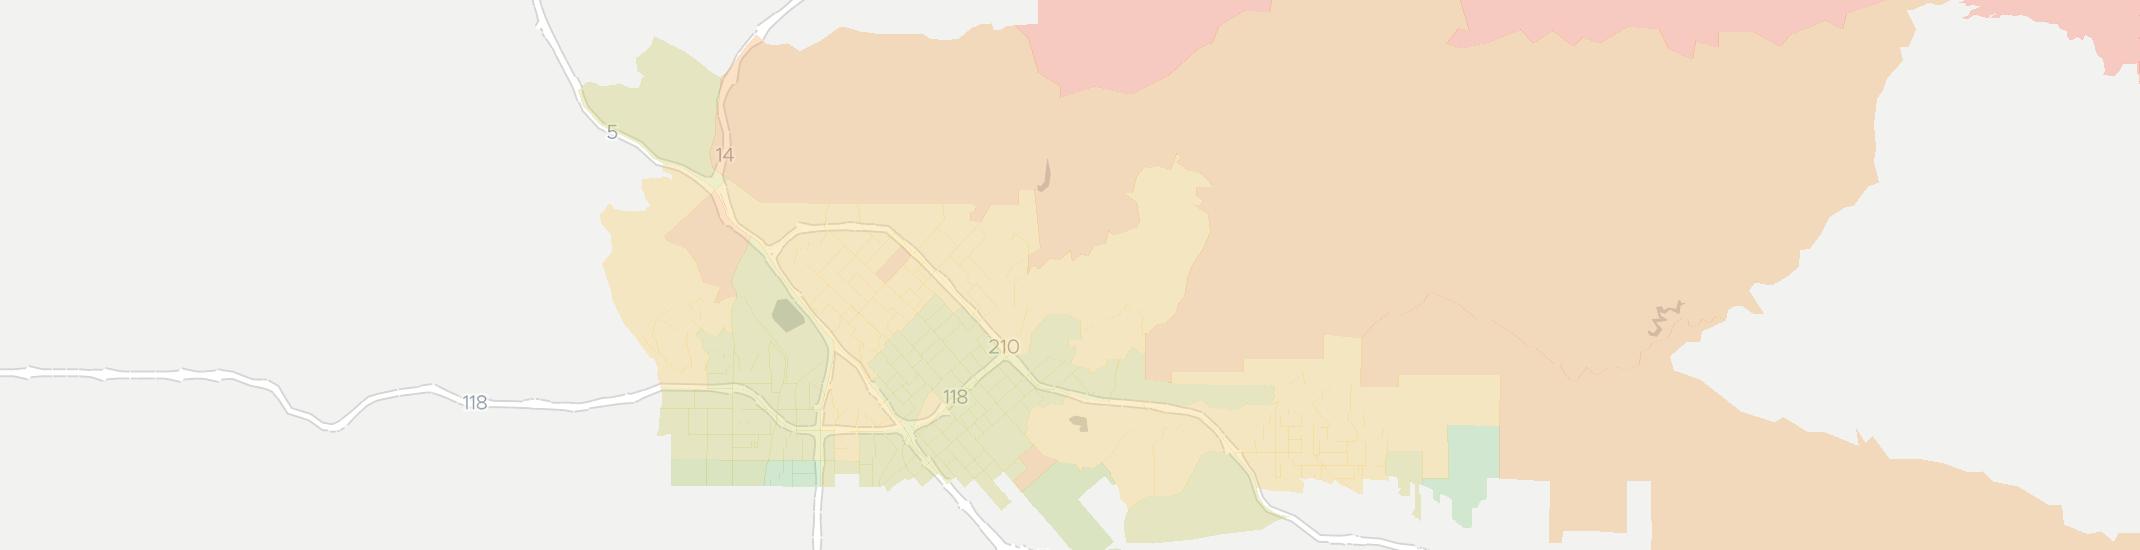 Sylmar Internet Competition Map. Click for interactive map.